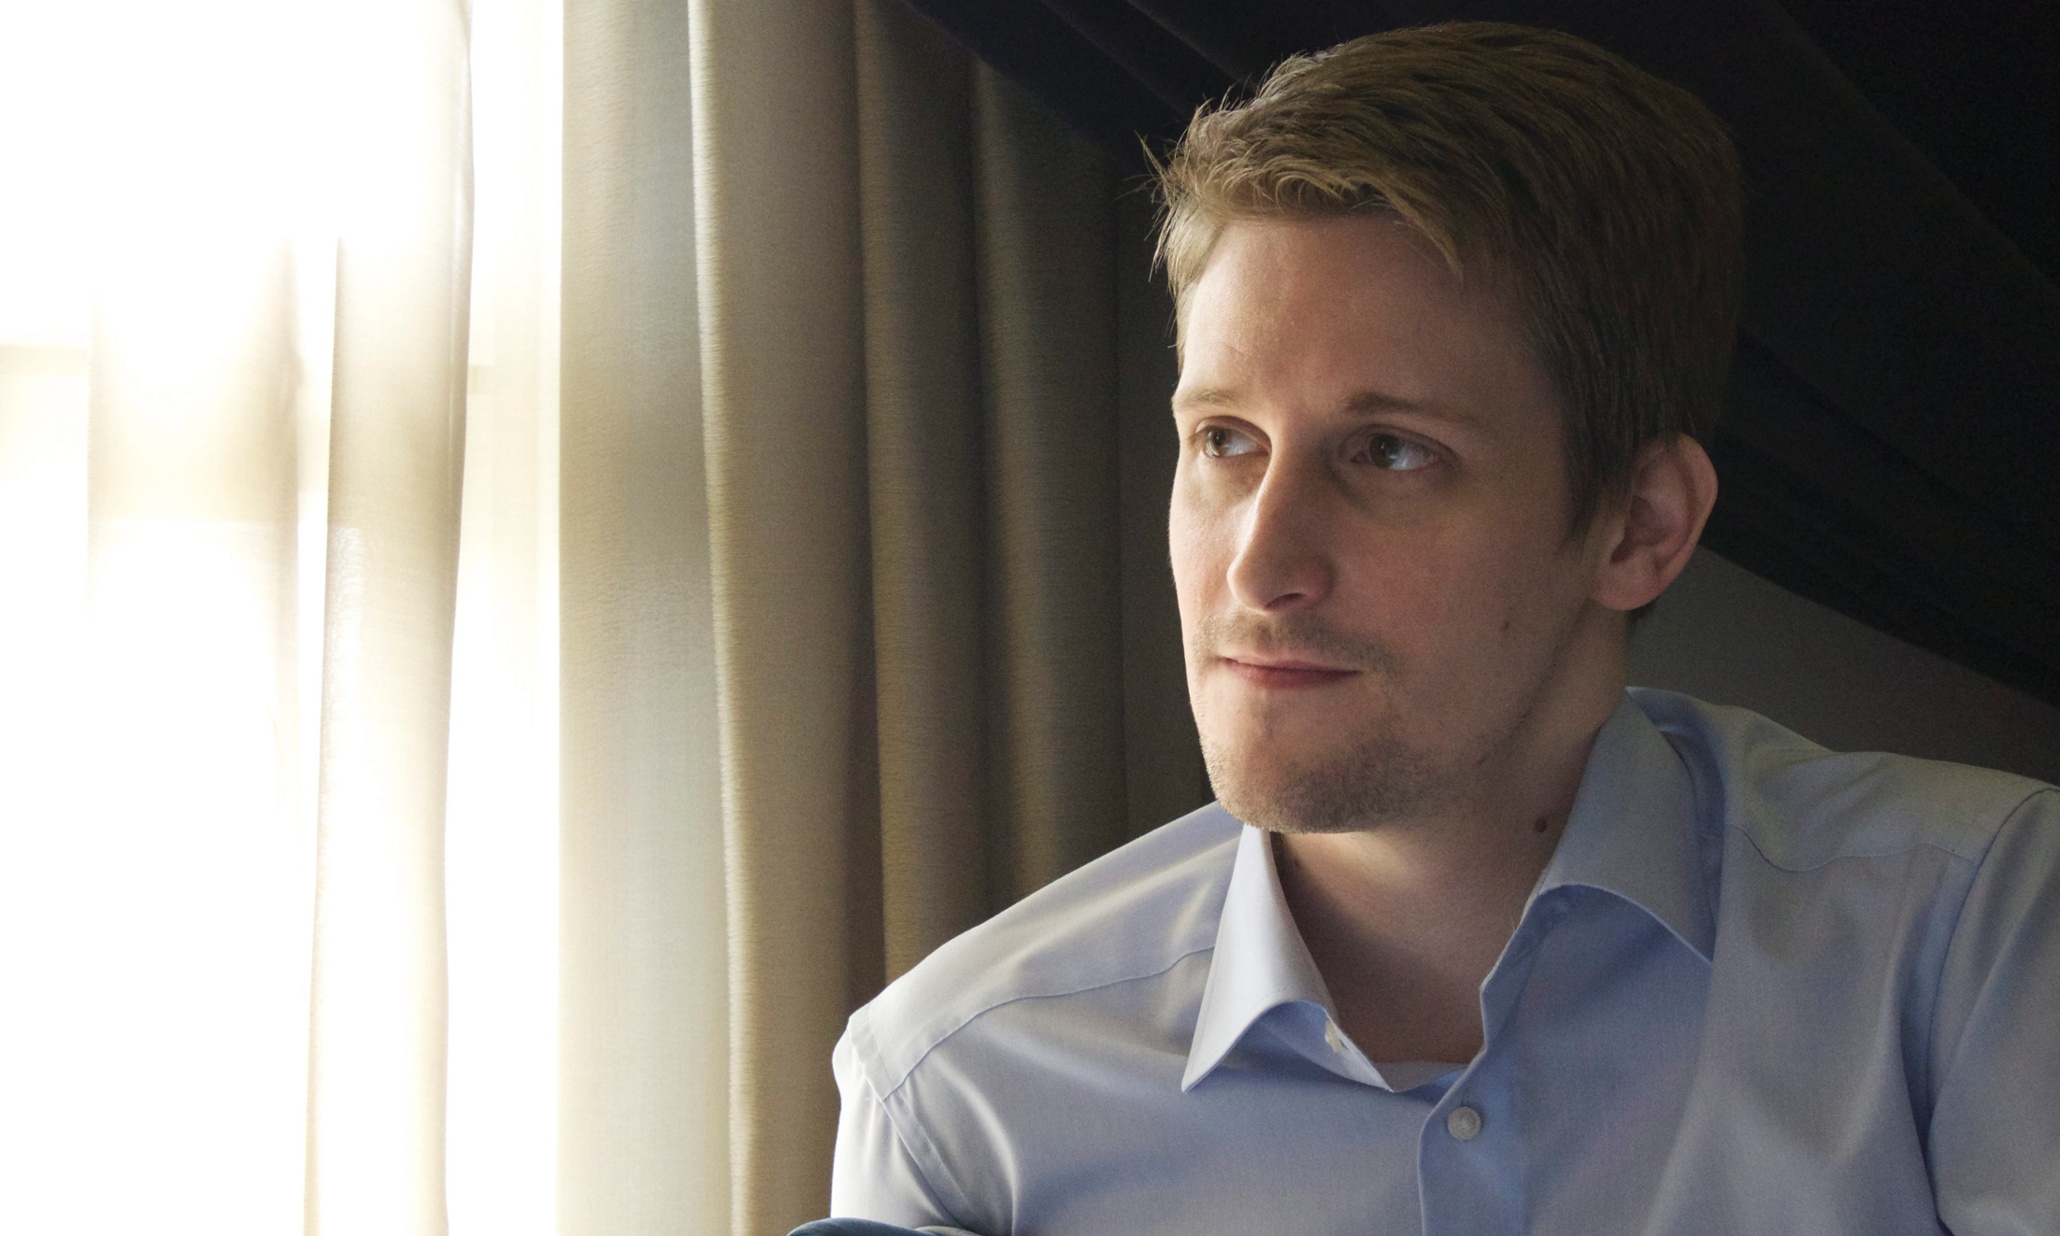 The Snowden Documentary Shows That Only Government Transparency Can